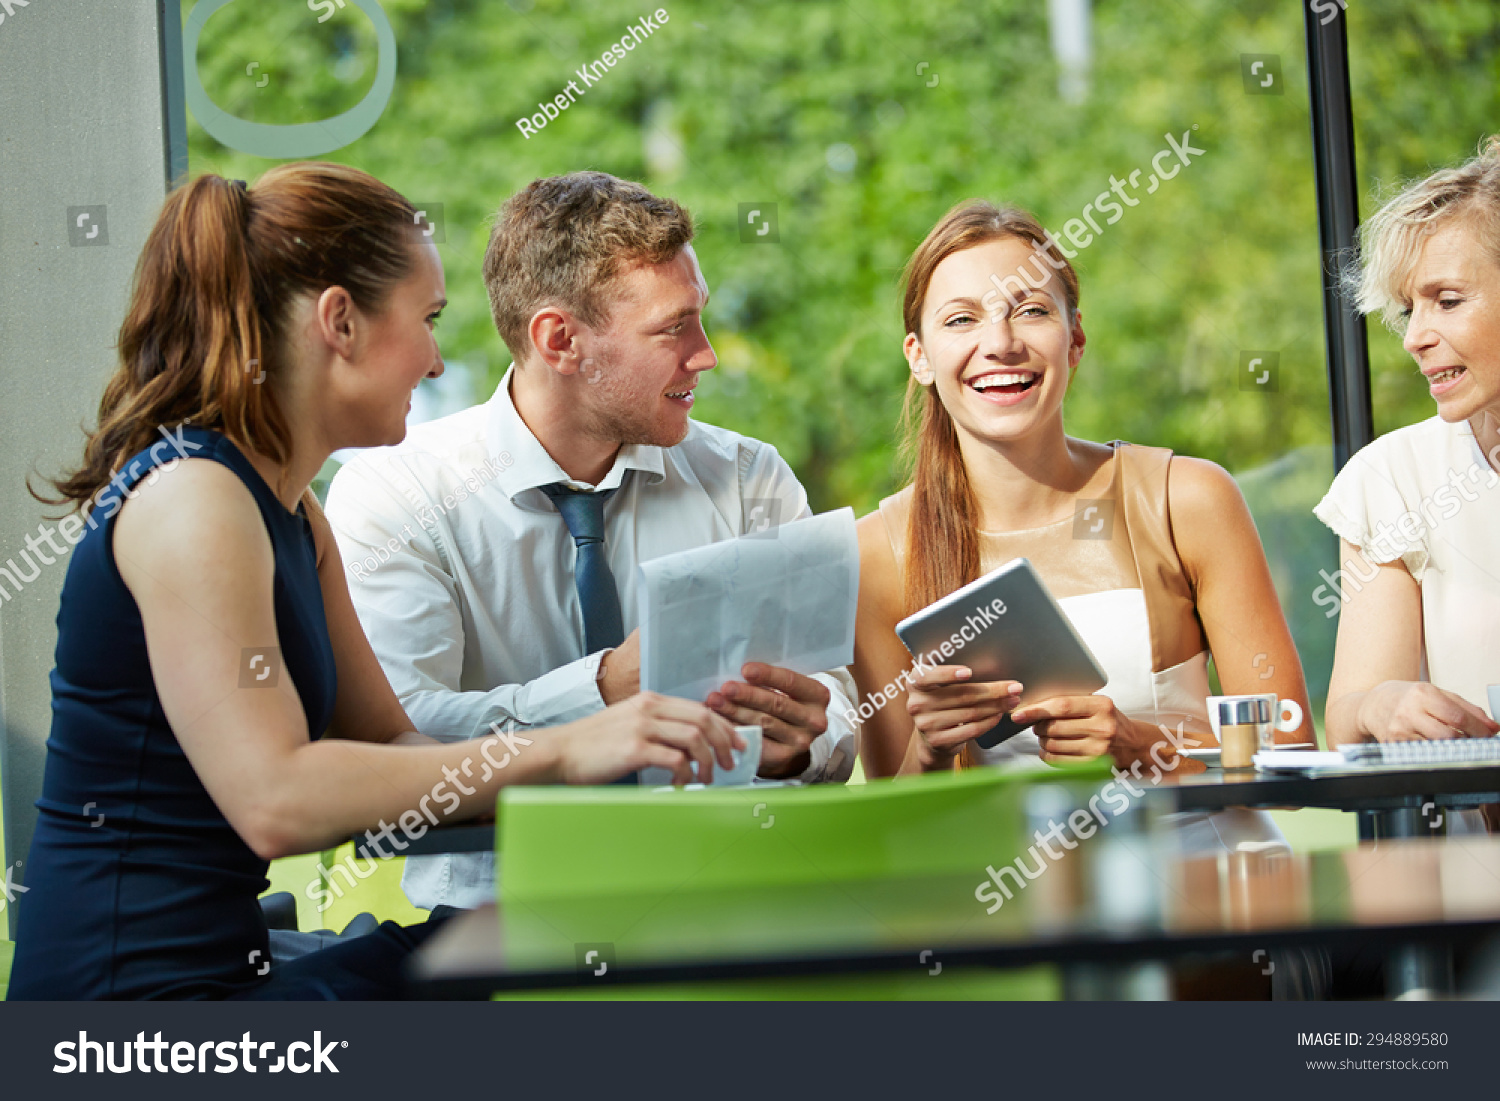 Young businesswoman laughing in business team meeting #294889580